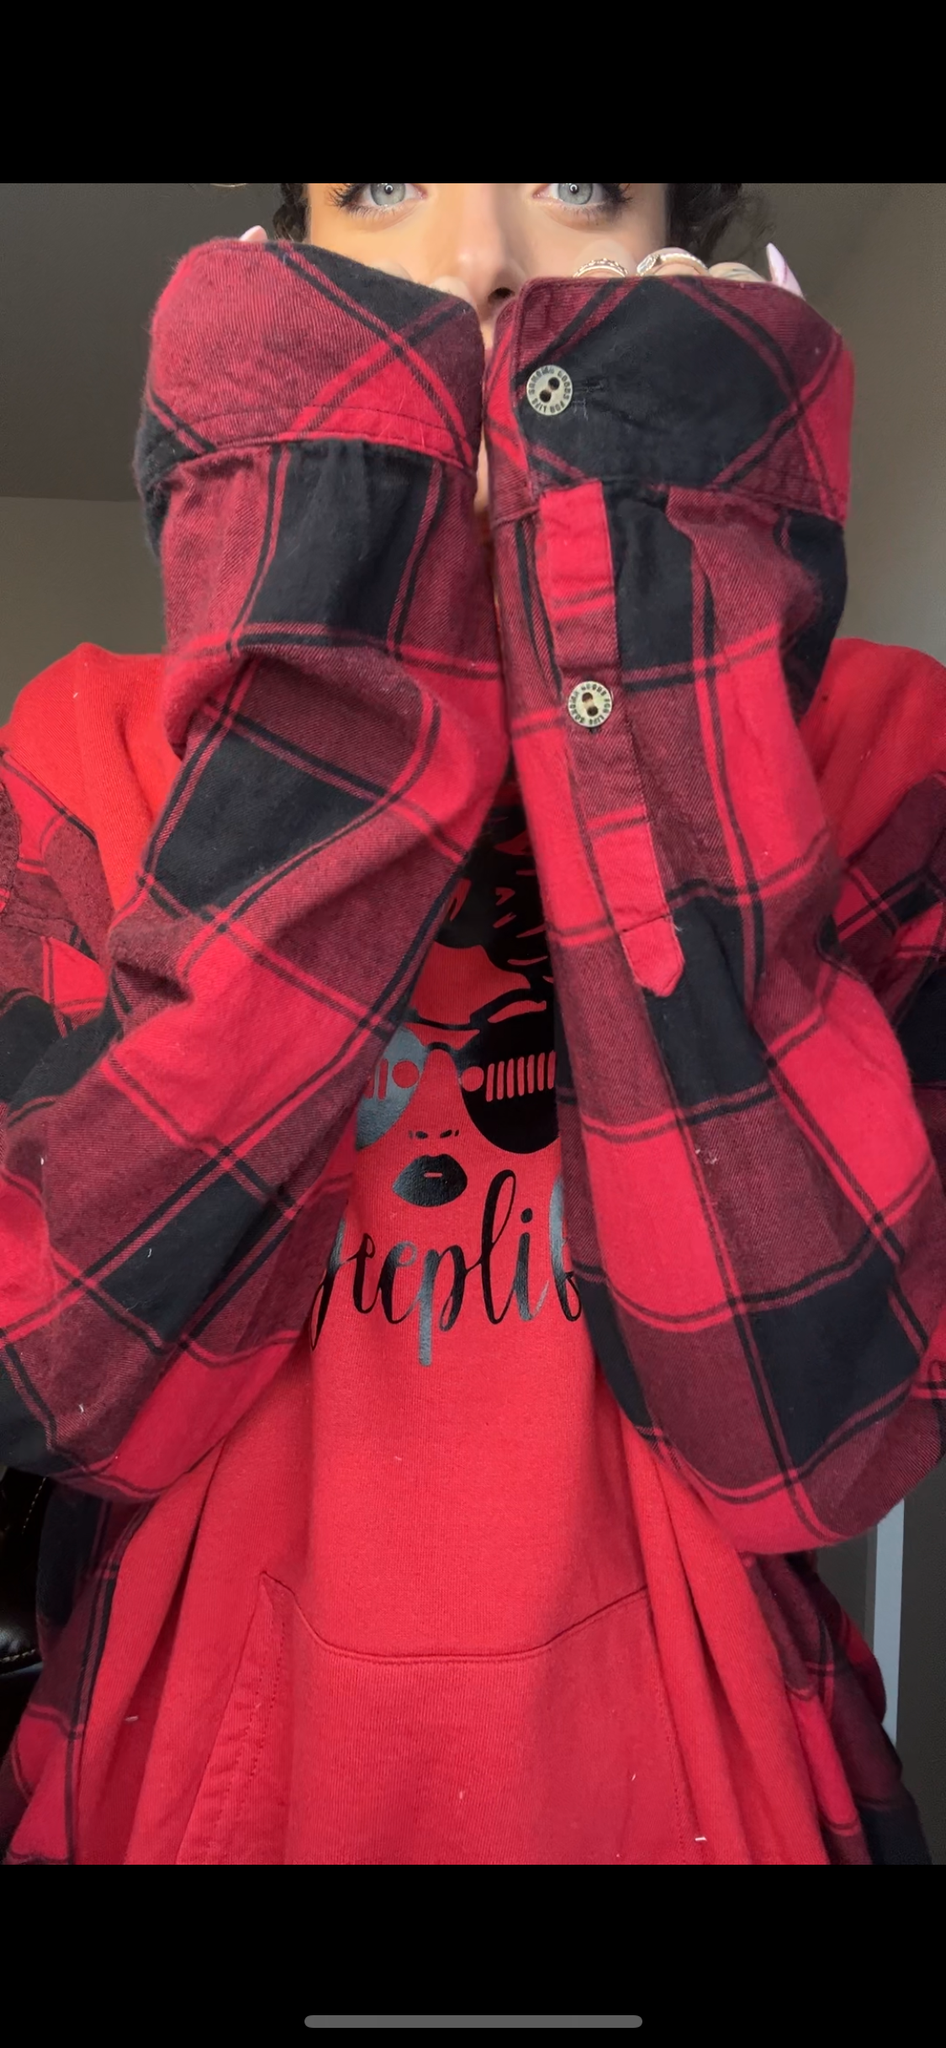 Upcycled Jeeplife – woman’s 2X – midweight sweatshirt with flannel sleeves￼